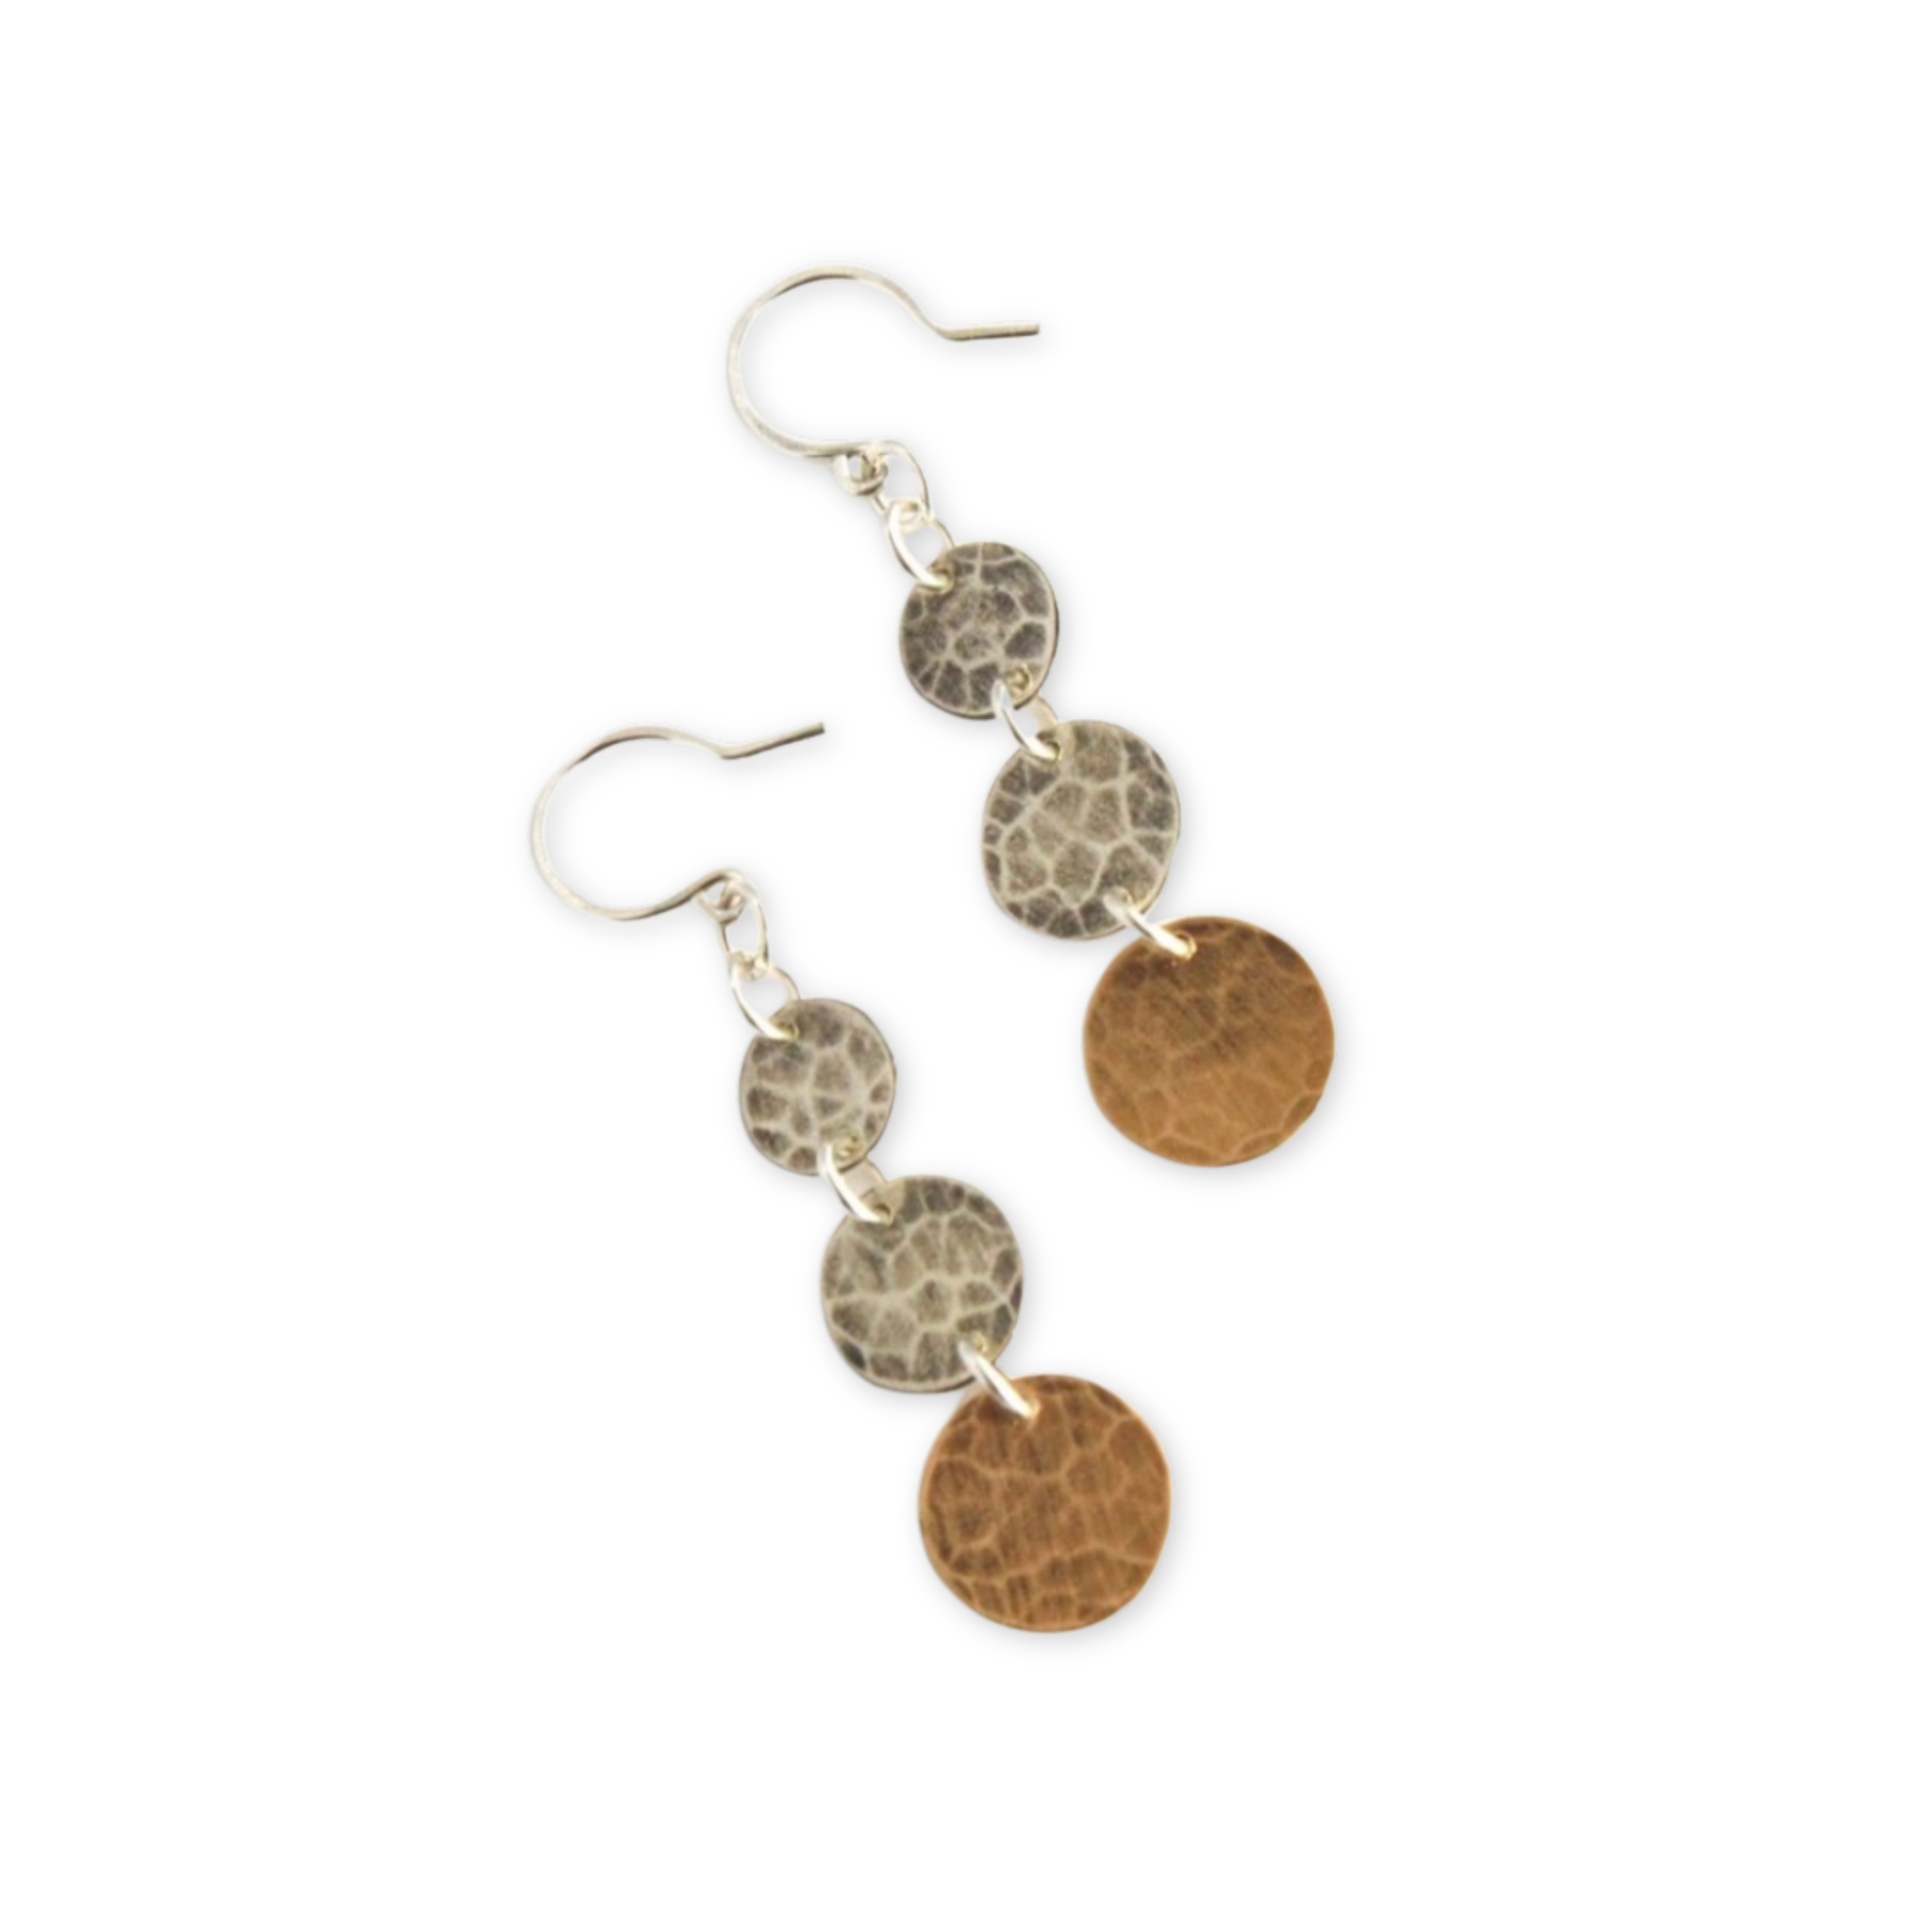 dangling earrings with three hand cut hammered discs